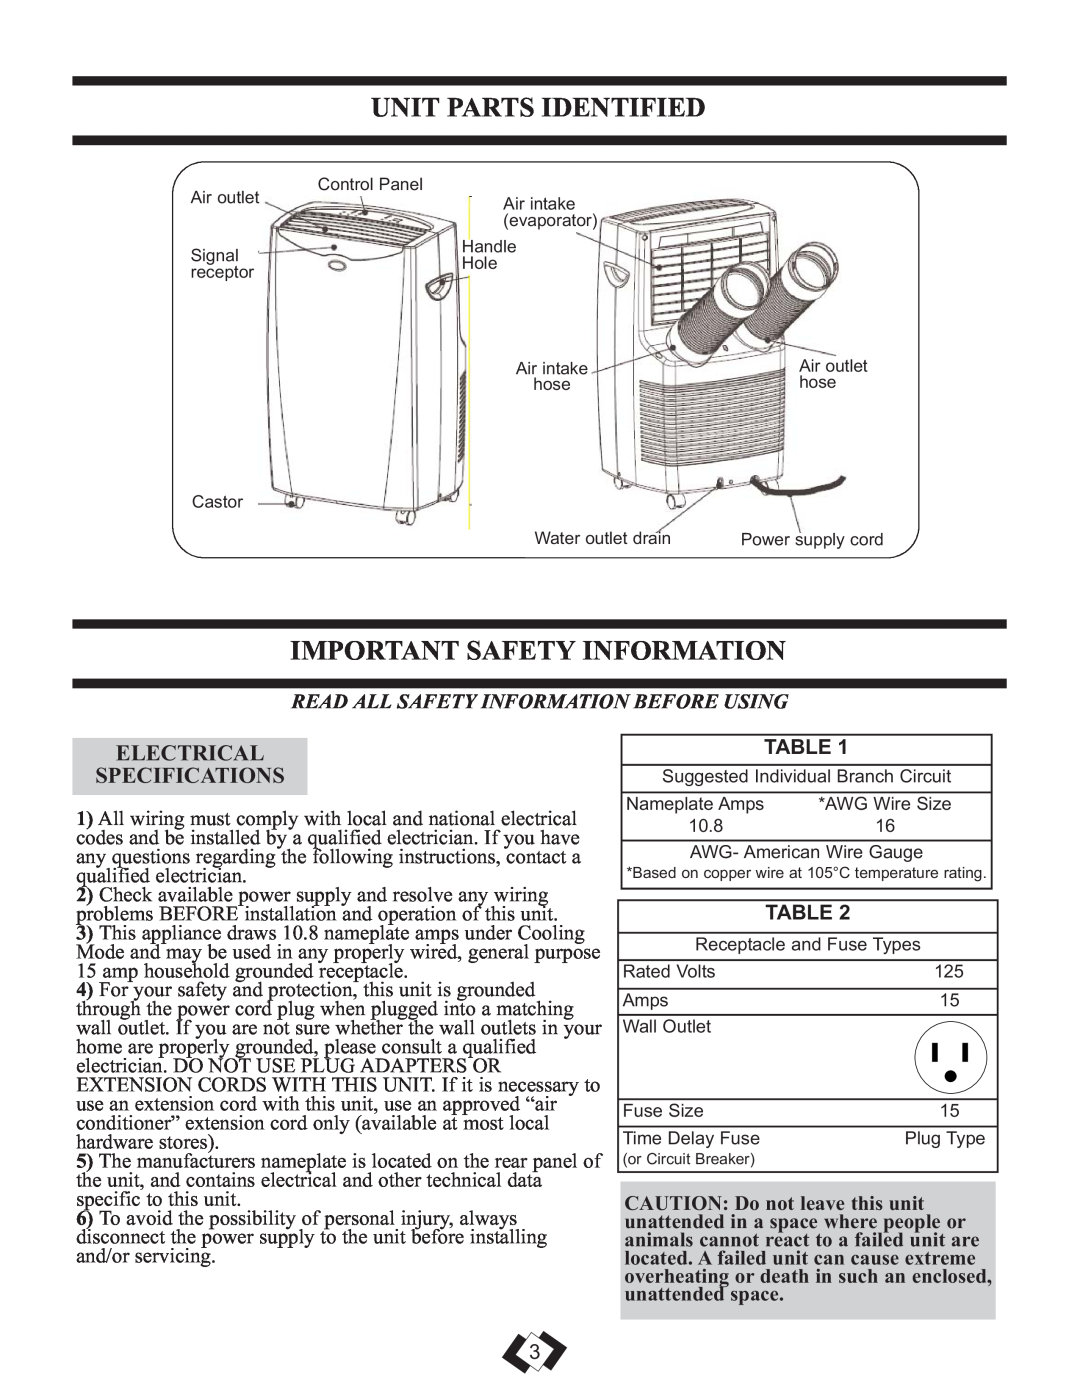 Danby DPAC 12099 manual Unit Parts Identified, Important Safety Information, Read All Safety Information Before Using 